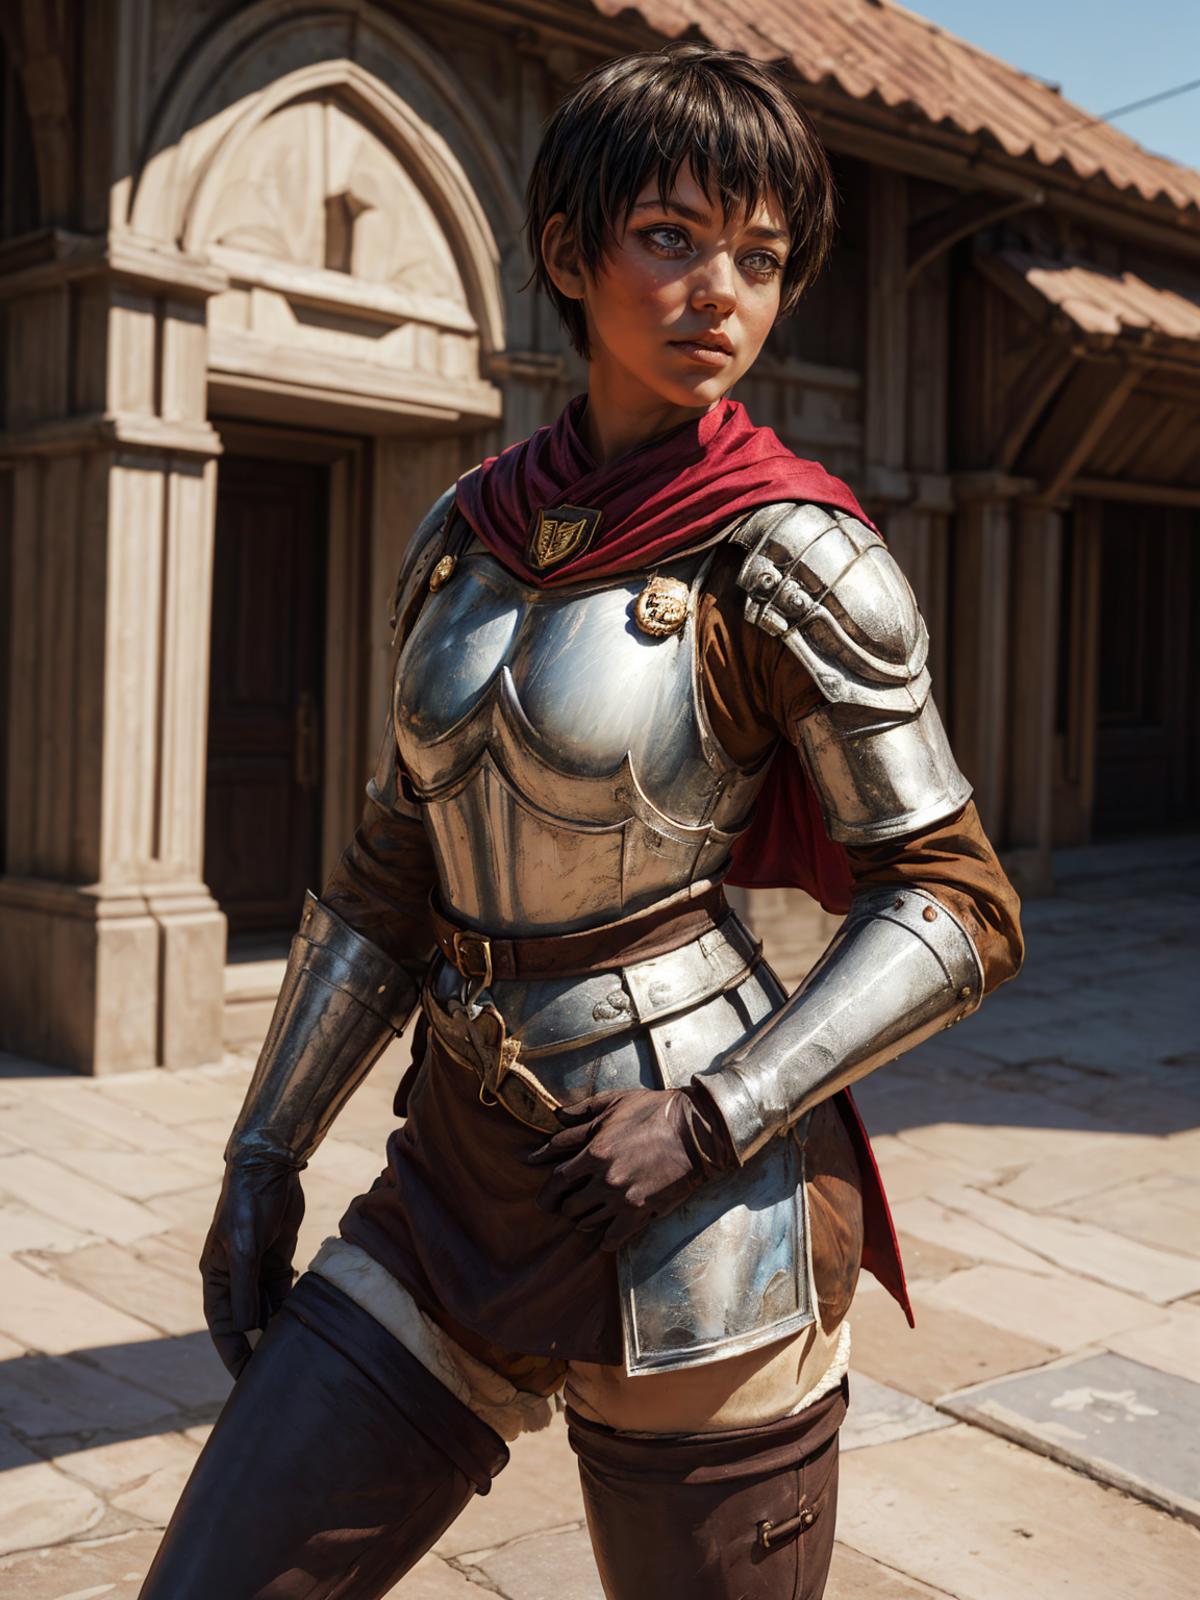 A woman wearing a metal armor costume and holding a sword.